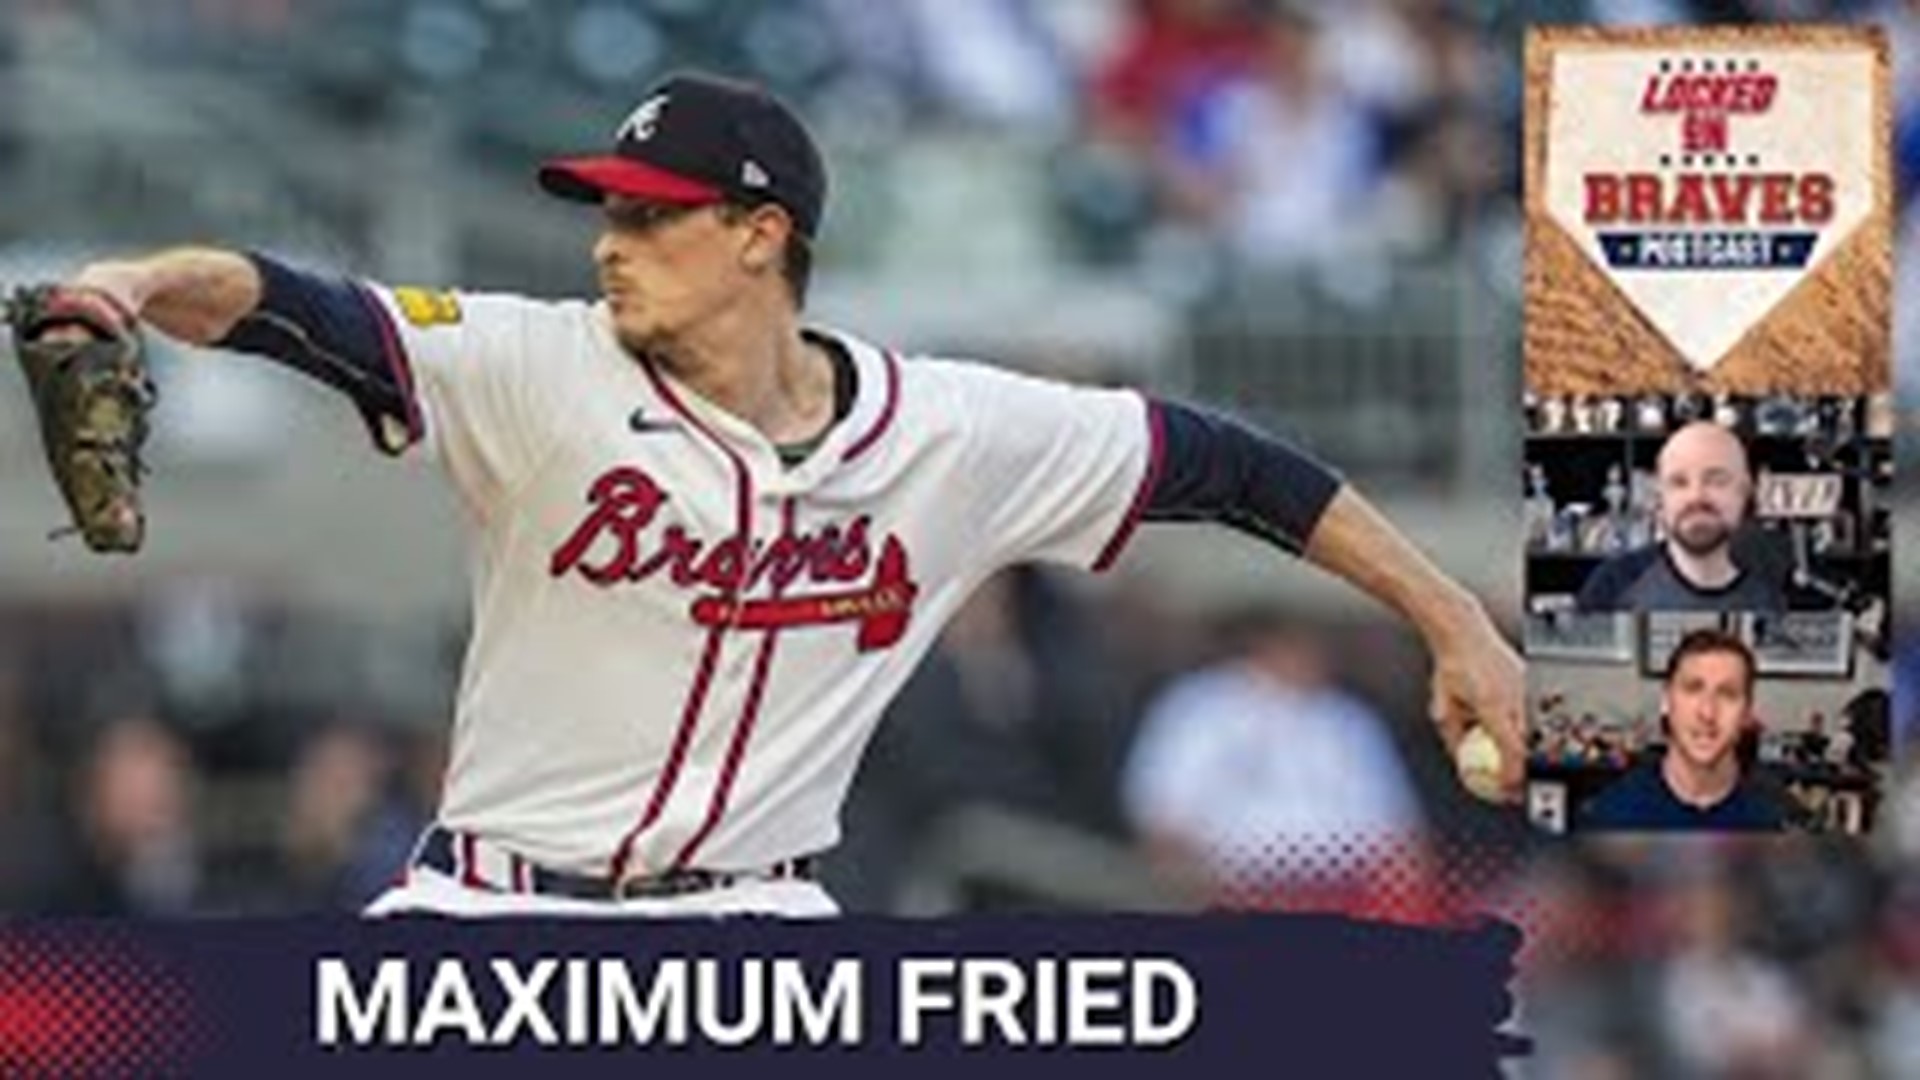 Max Fried was magnificent, covering all nine innings as the Atlanta Braves shut out the Miami Marlins by a 5-0 score at Truist Park on Tuesday.